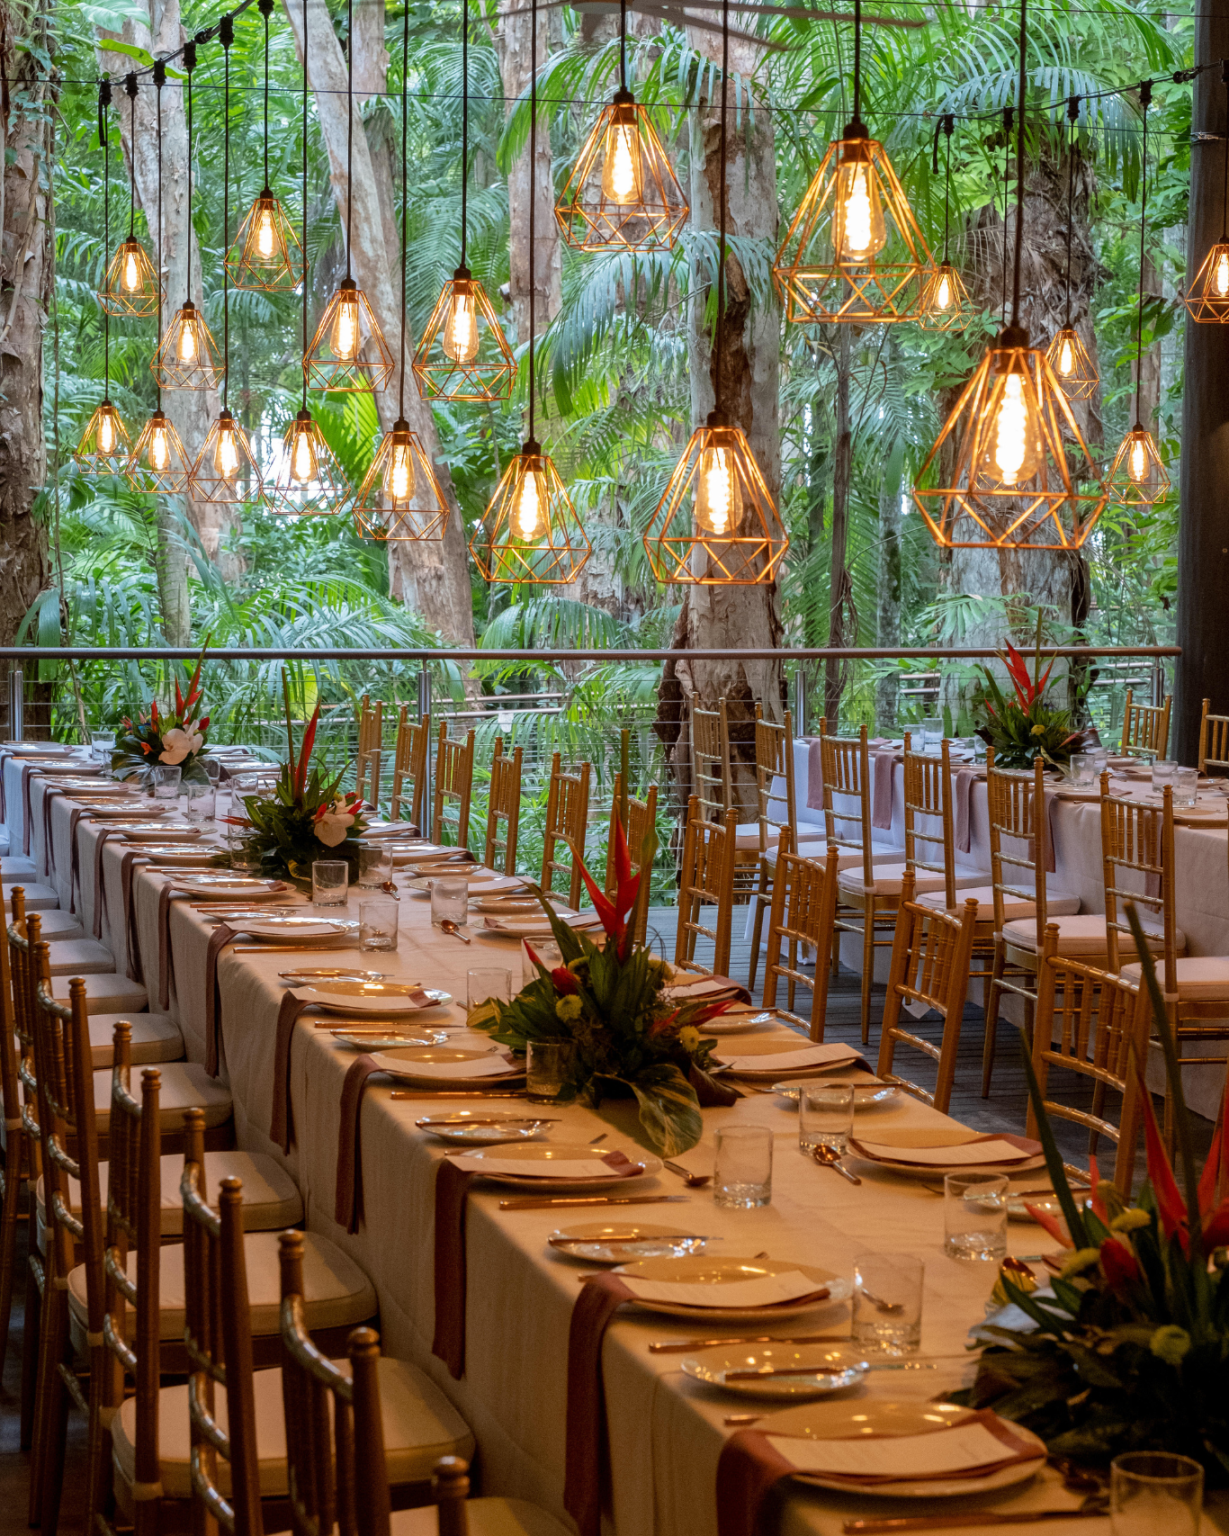 Melaleuca Resort - Palm cove weddings - Dining setting with pendant lights and flower center pieces